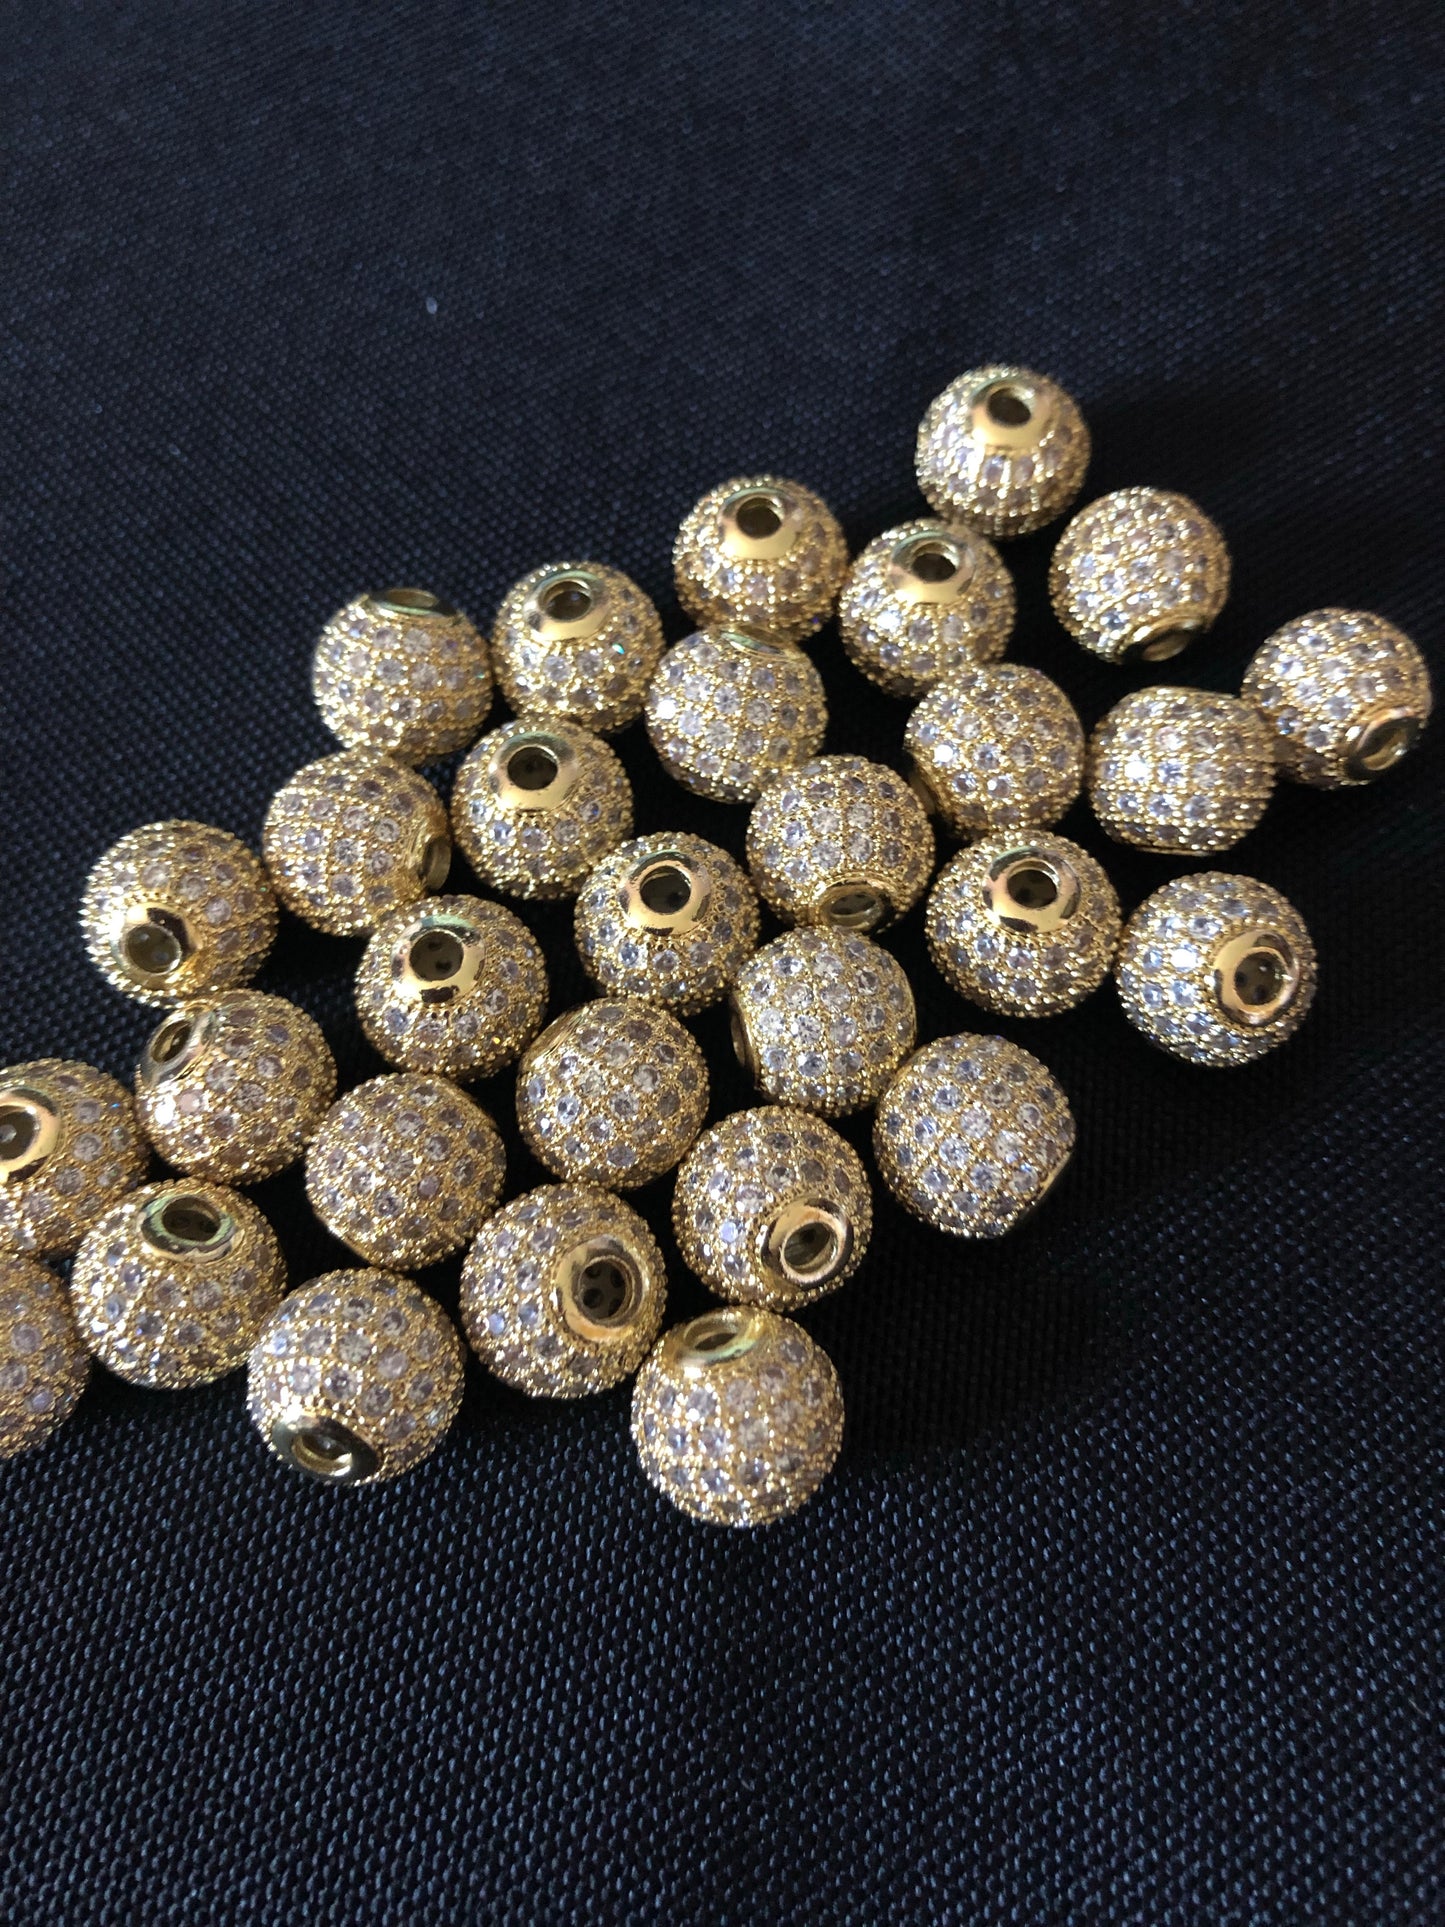 CZ Pave Spacer Beads - 8mm